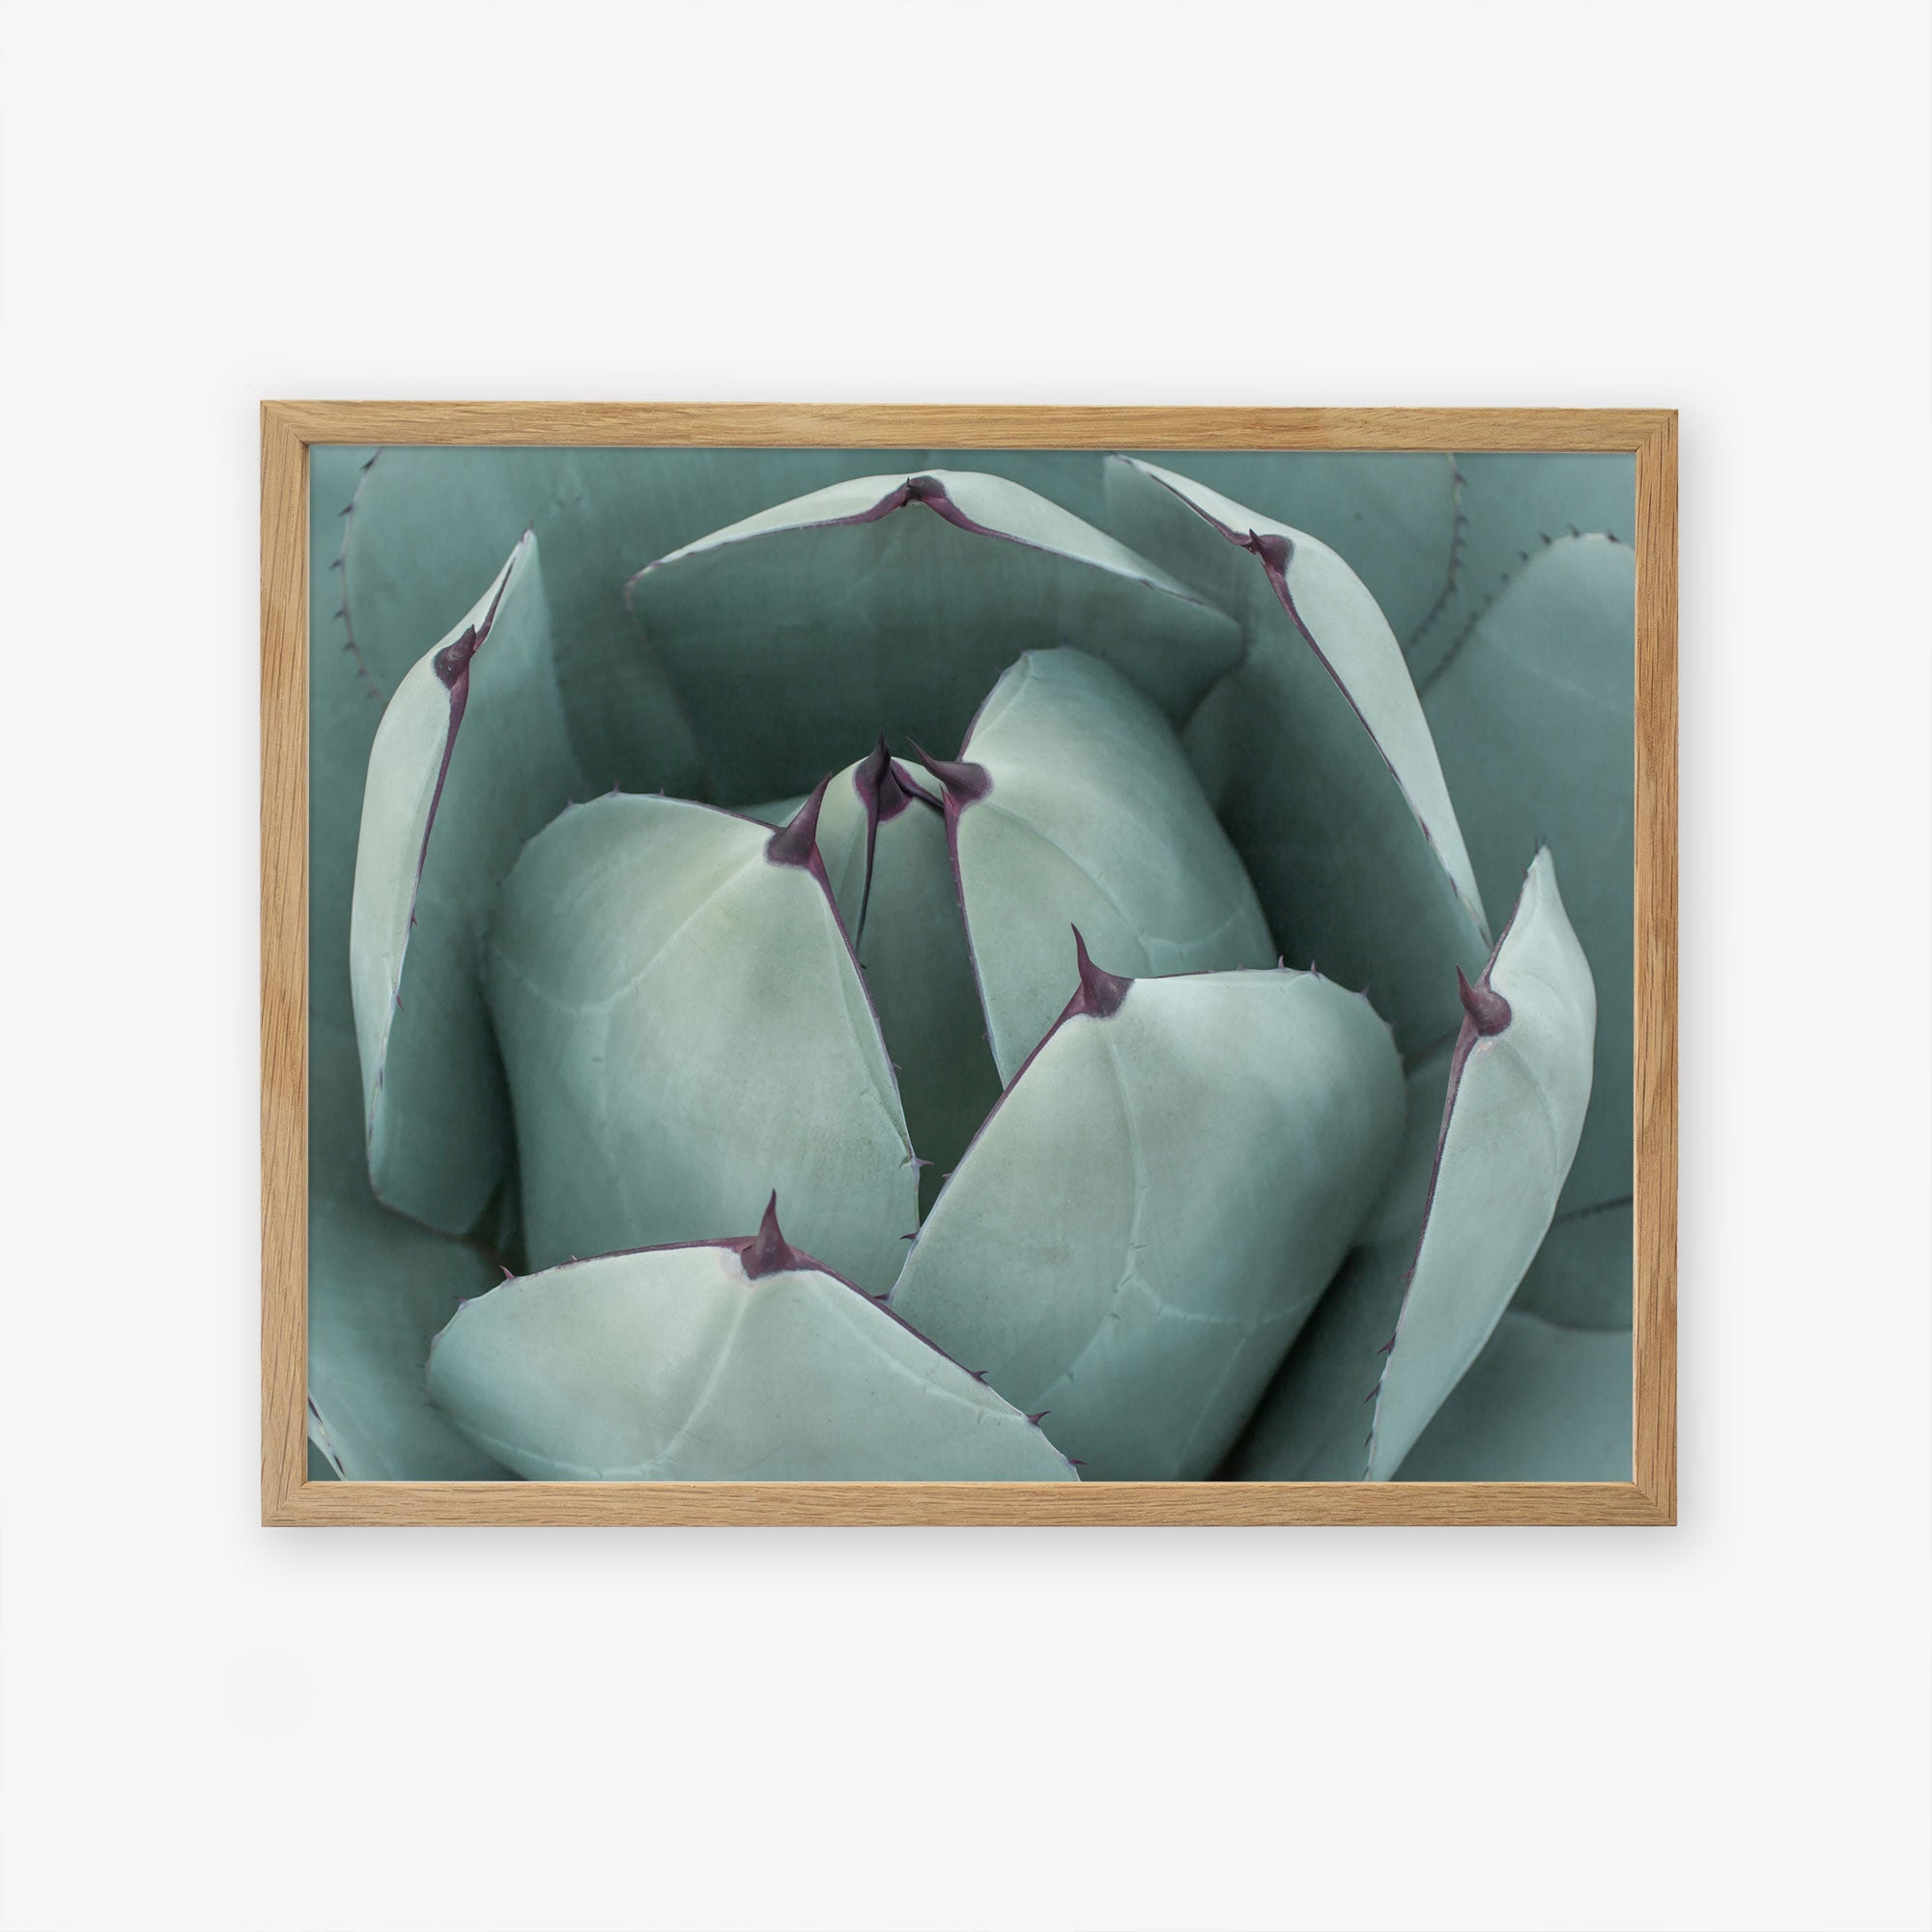 A framed photograph of an Abstract Teal Green Botanical Print, &#39;Teal Petals&#39; by Offley Green, printed on archival photographic paper and displayed on a white background.